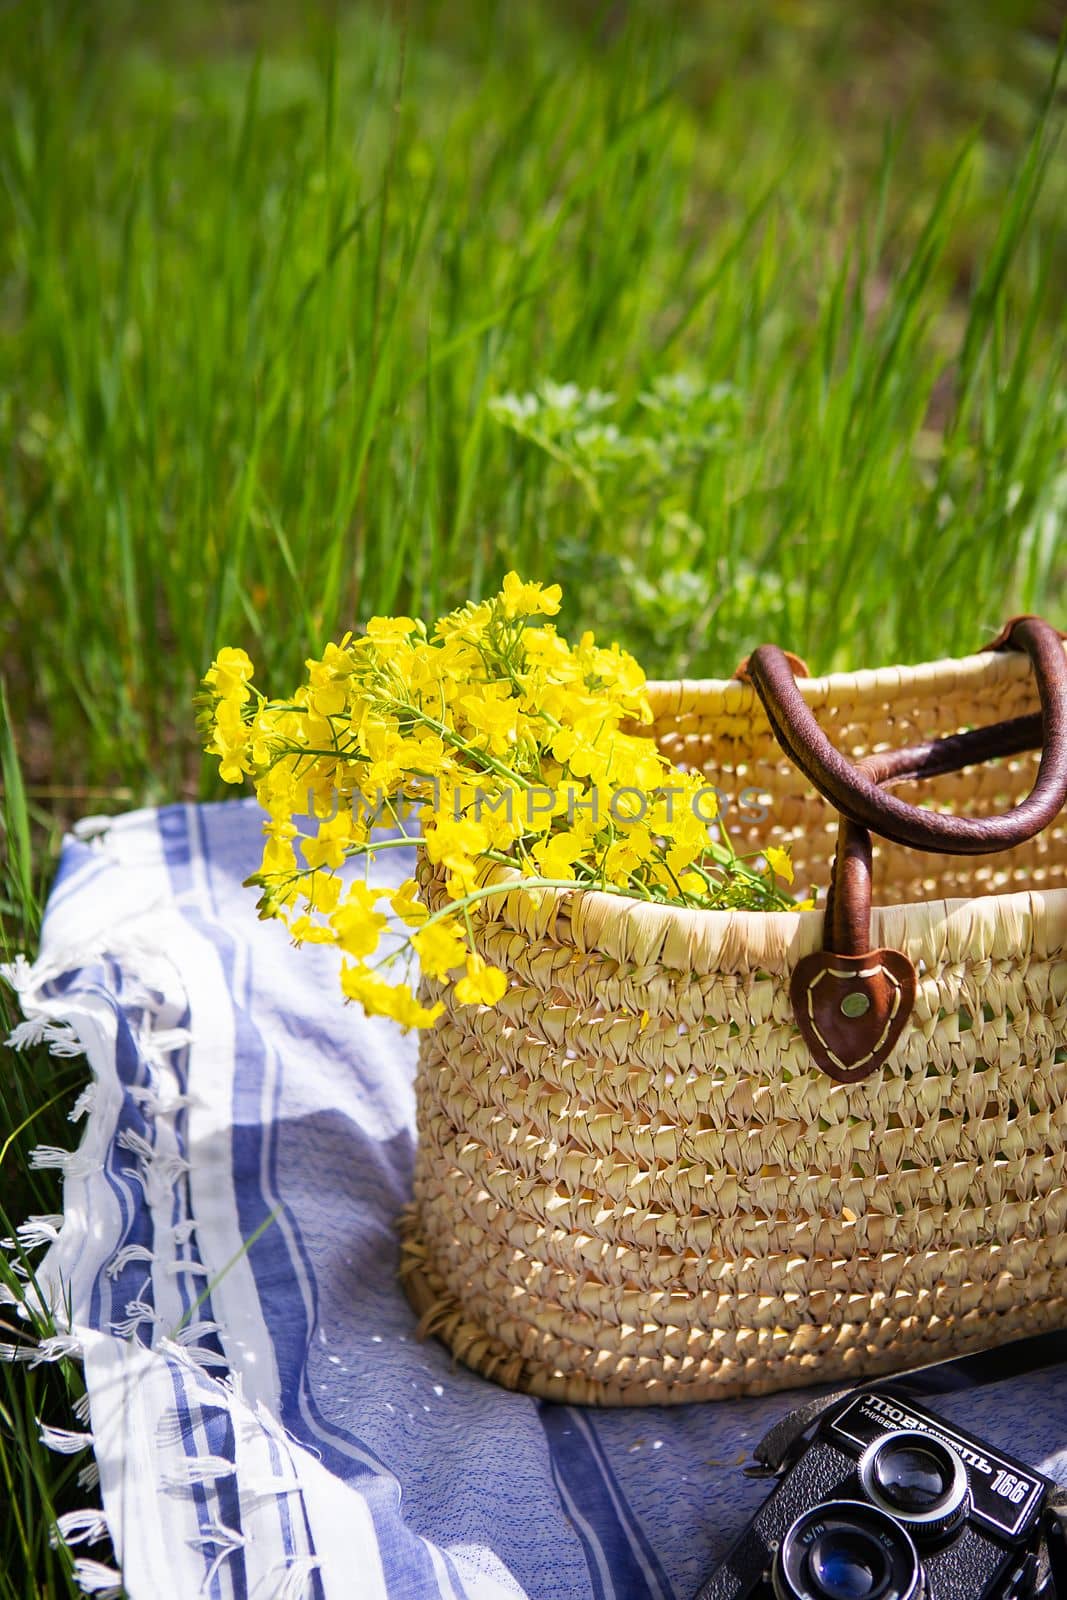 A straw picnic basket stands on a blue blanket on green grass along with a bouquet of yellow flowers. In the background is an old camera with the name Lover 166 written on it. by sfinks